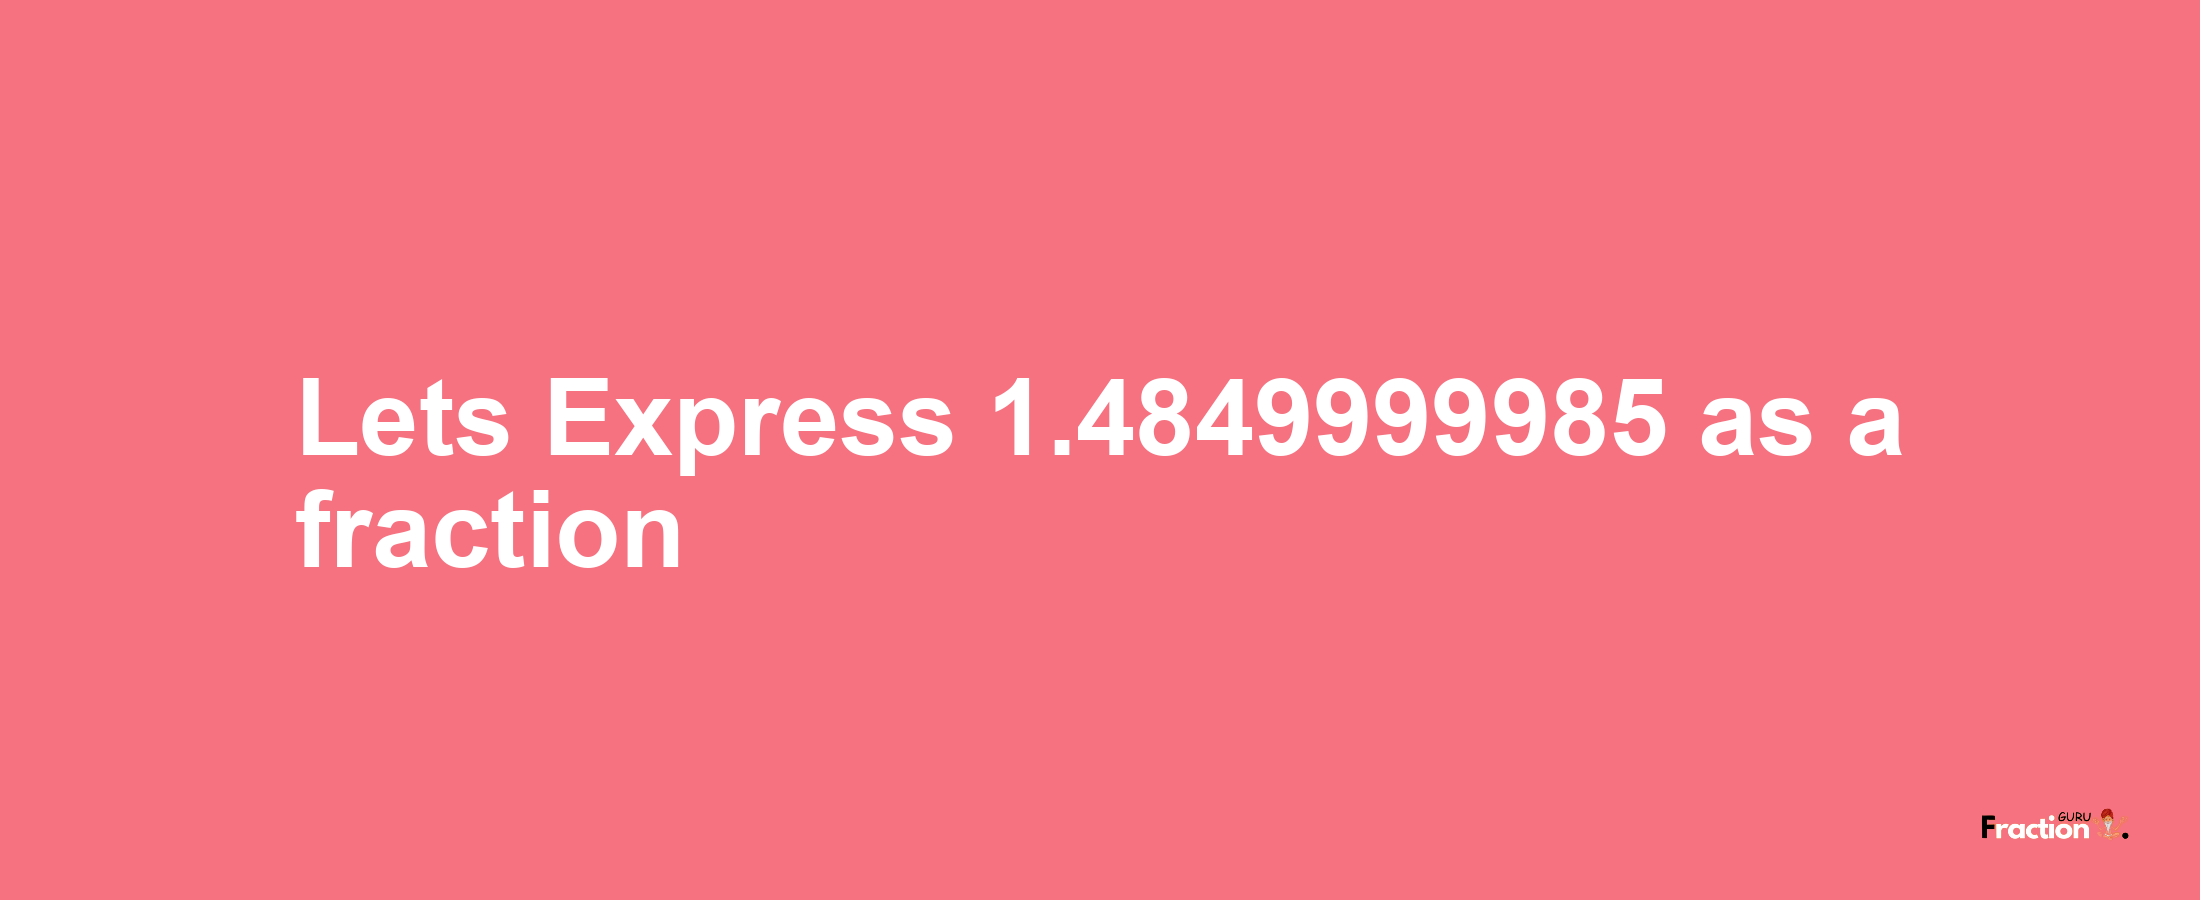 Lets Express 1.4849999985 as afraction